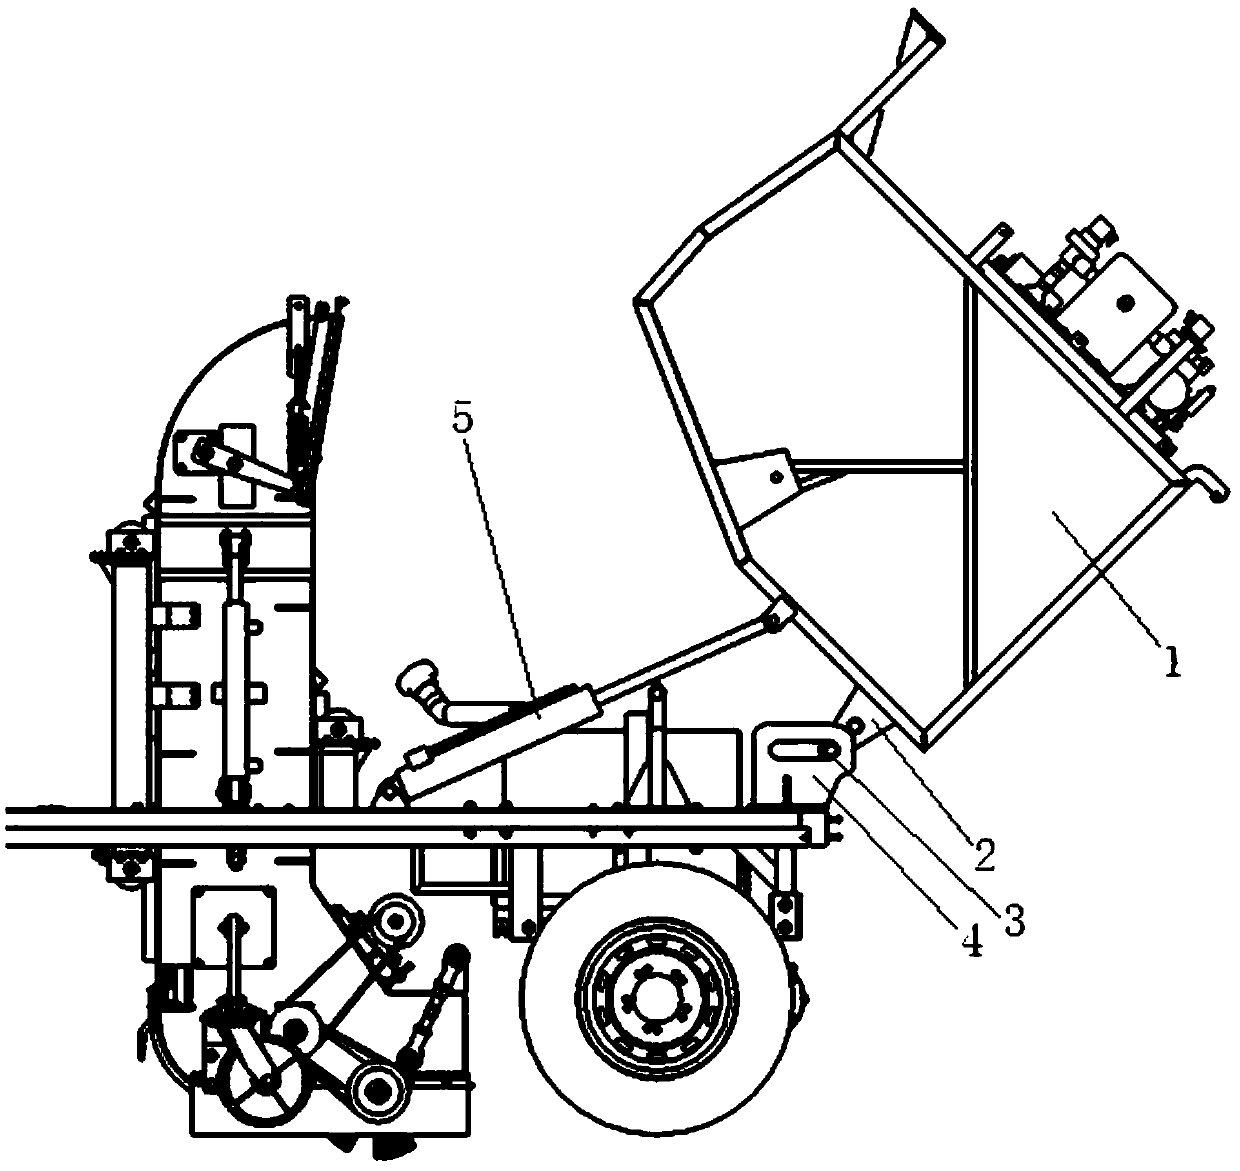 A garbage bin lifting and dumping mechanism